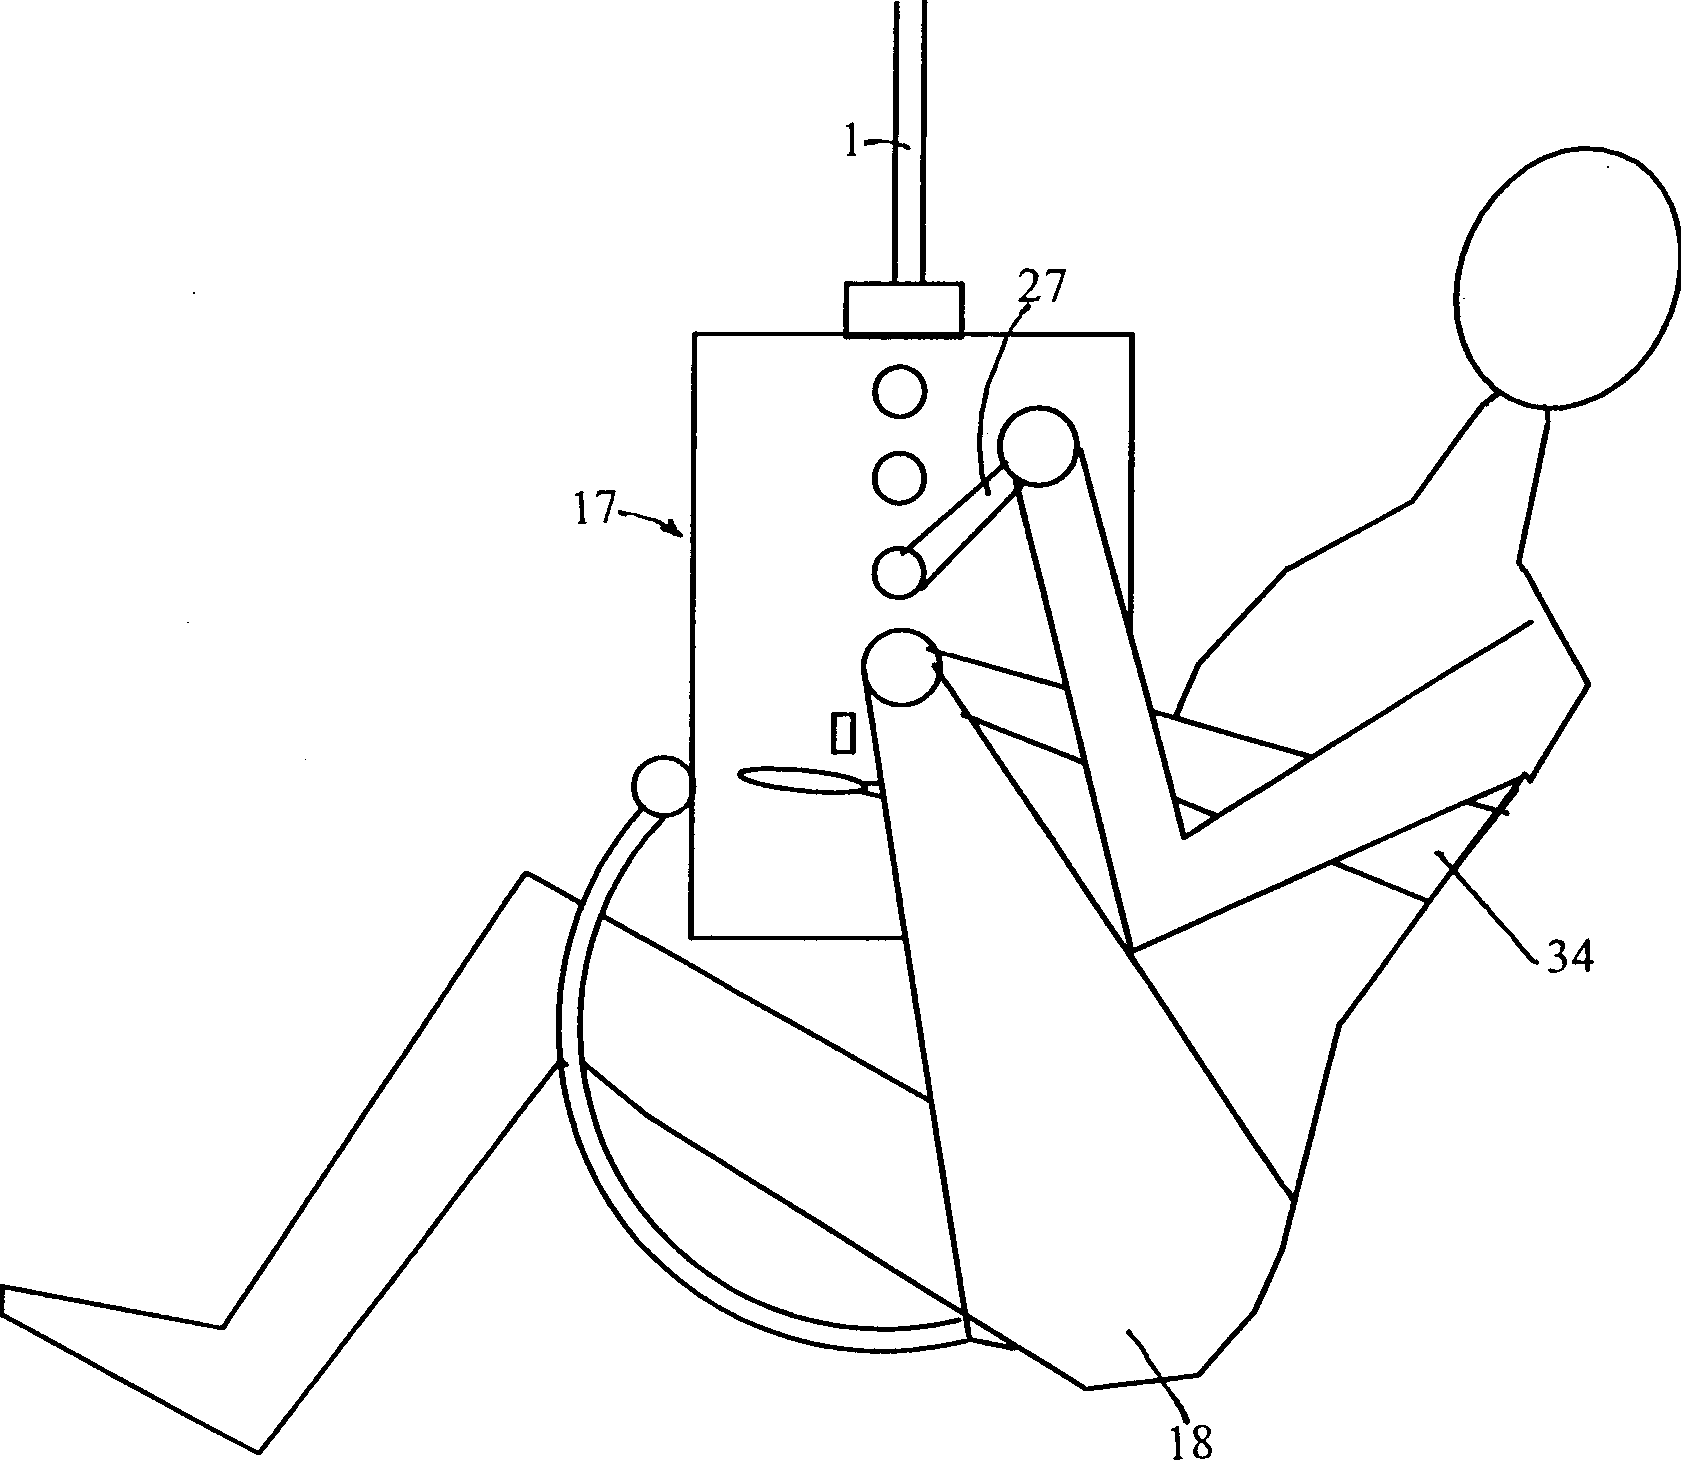 Device for lowering persons from high-rise building